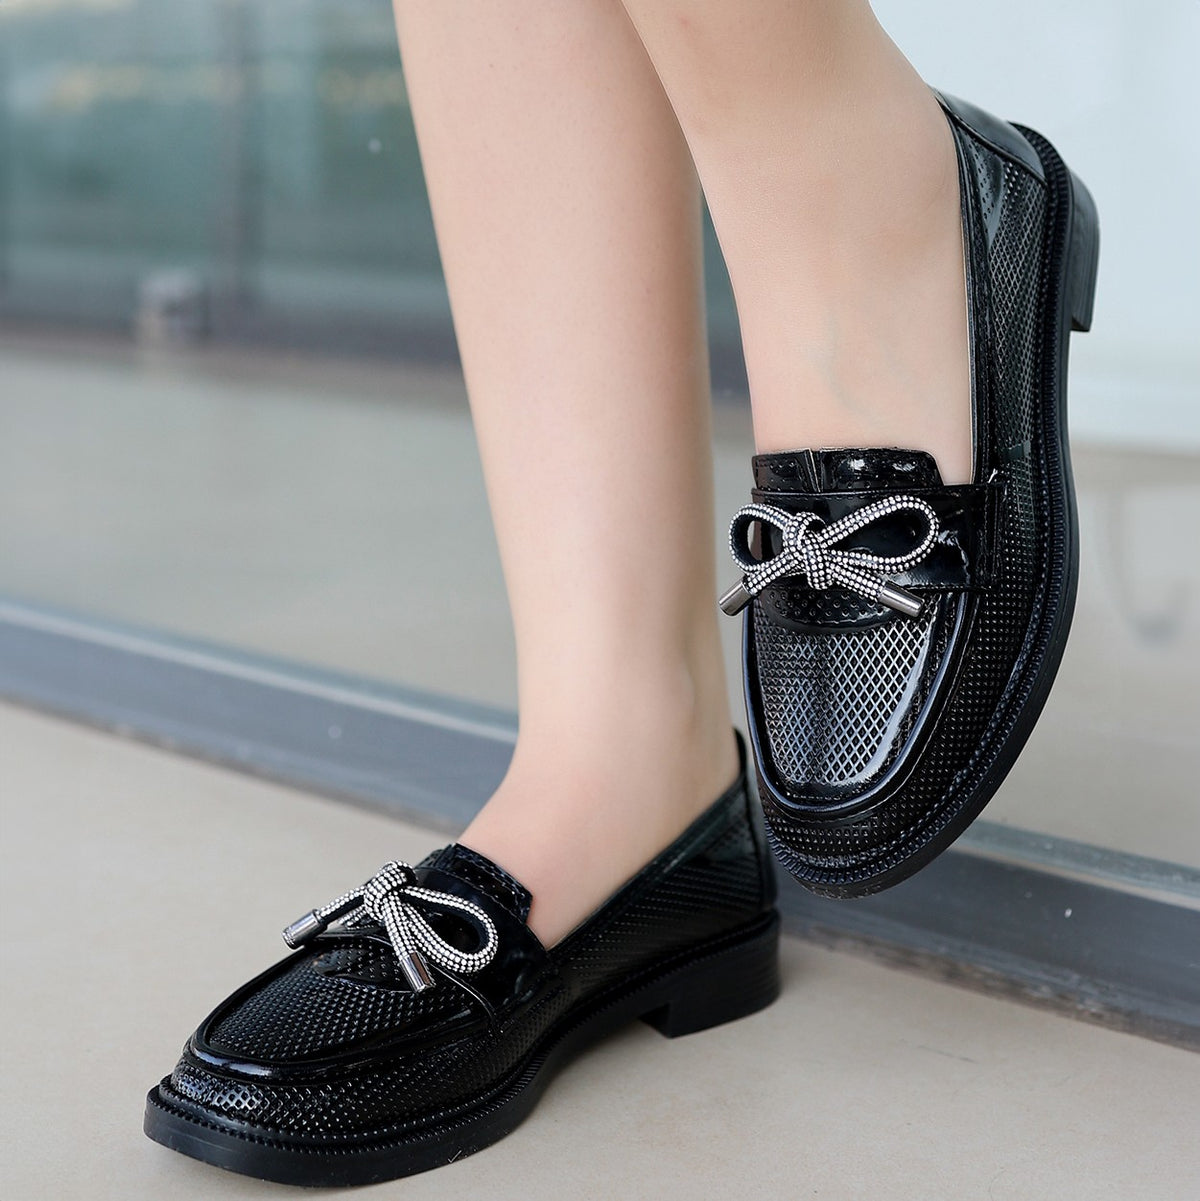 Women's Chay Black Patent Leather Ballerina Shoes - STREETMODE™